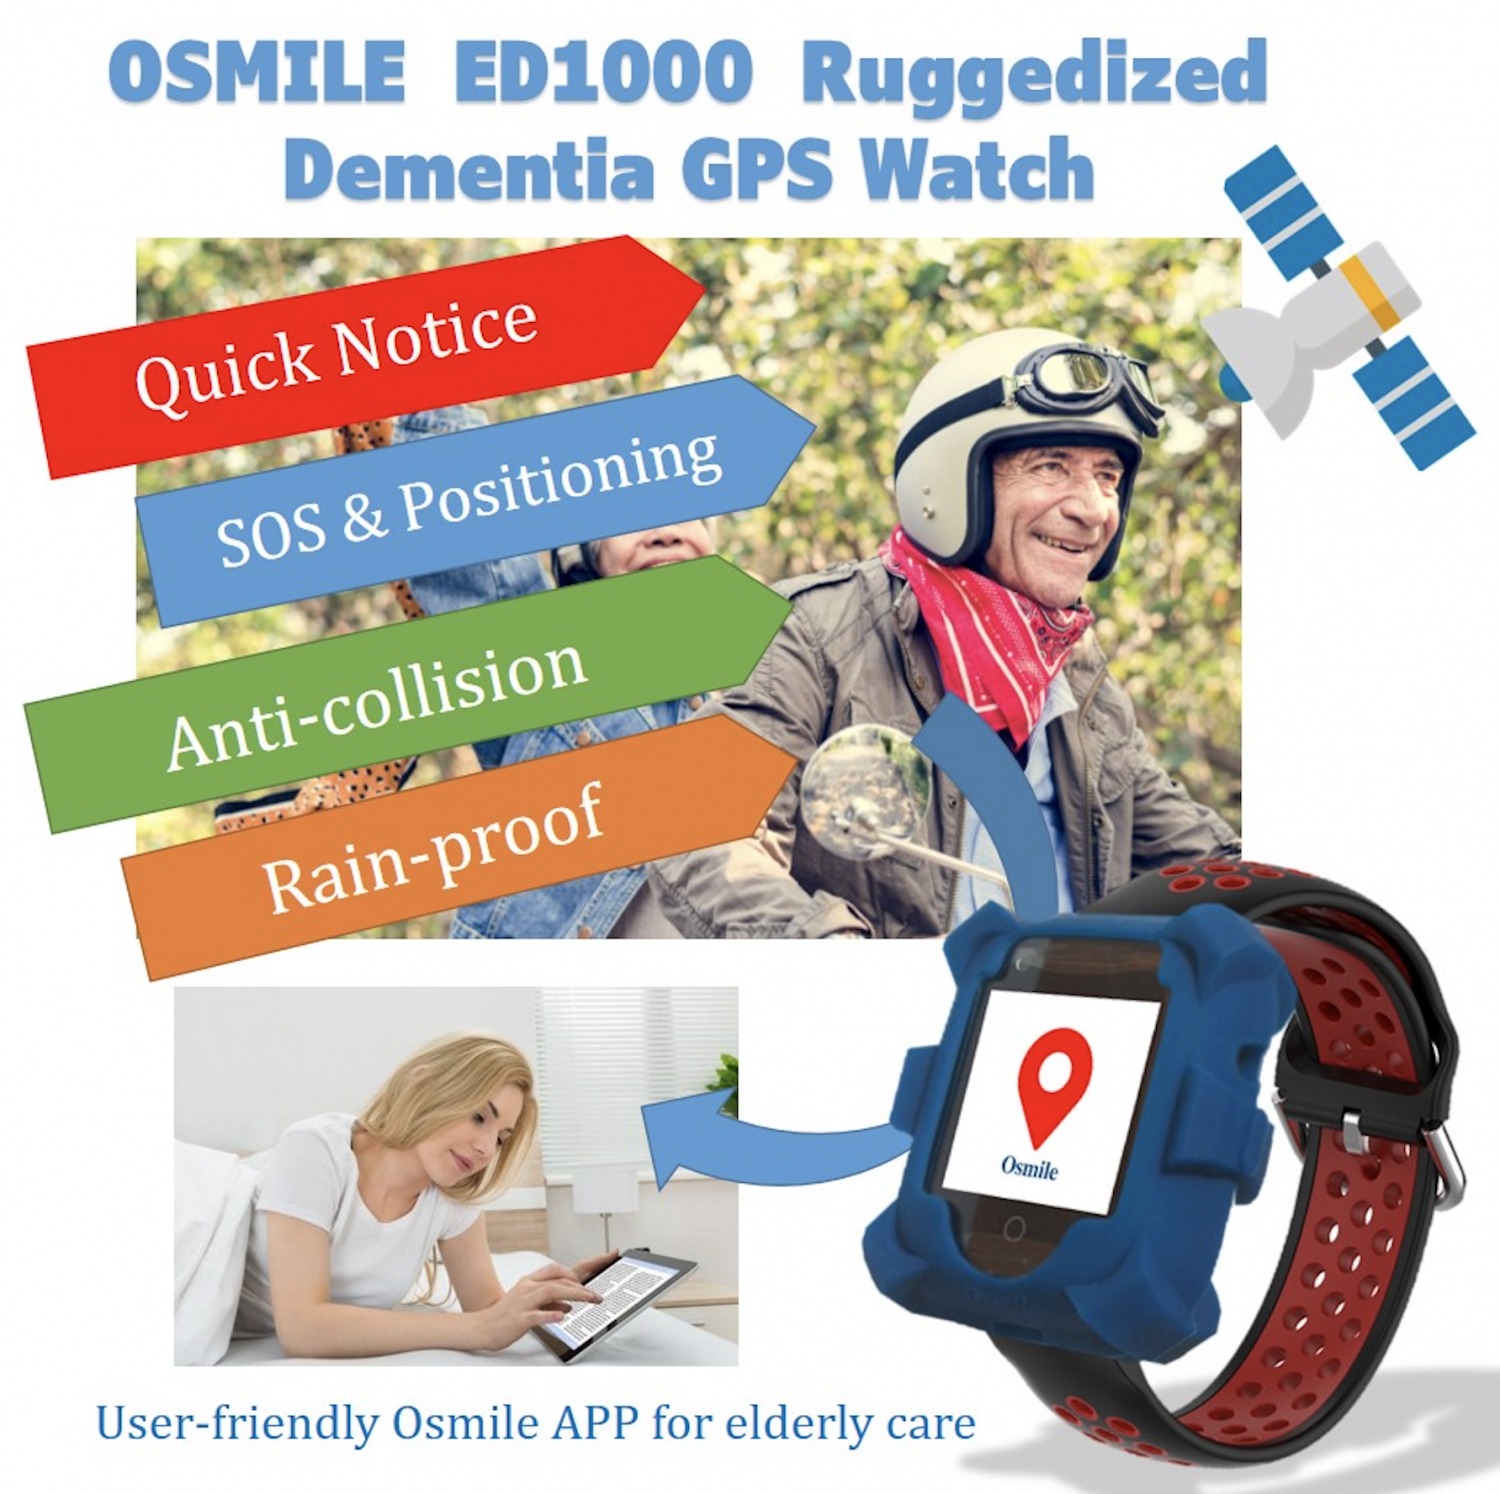 OSMILE ED1000 Ruggedized Dementia GPS Tracker, GPS Watch, for People with Dementia, Autism, and other Disabilities